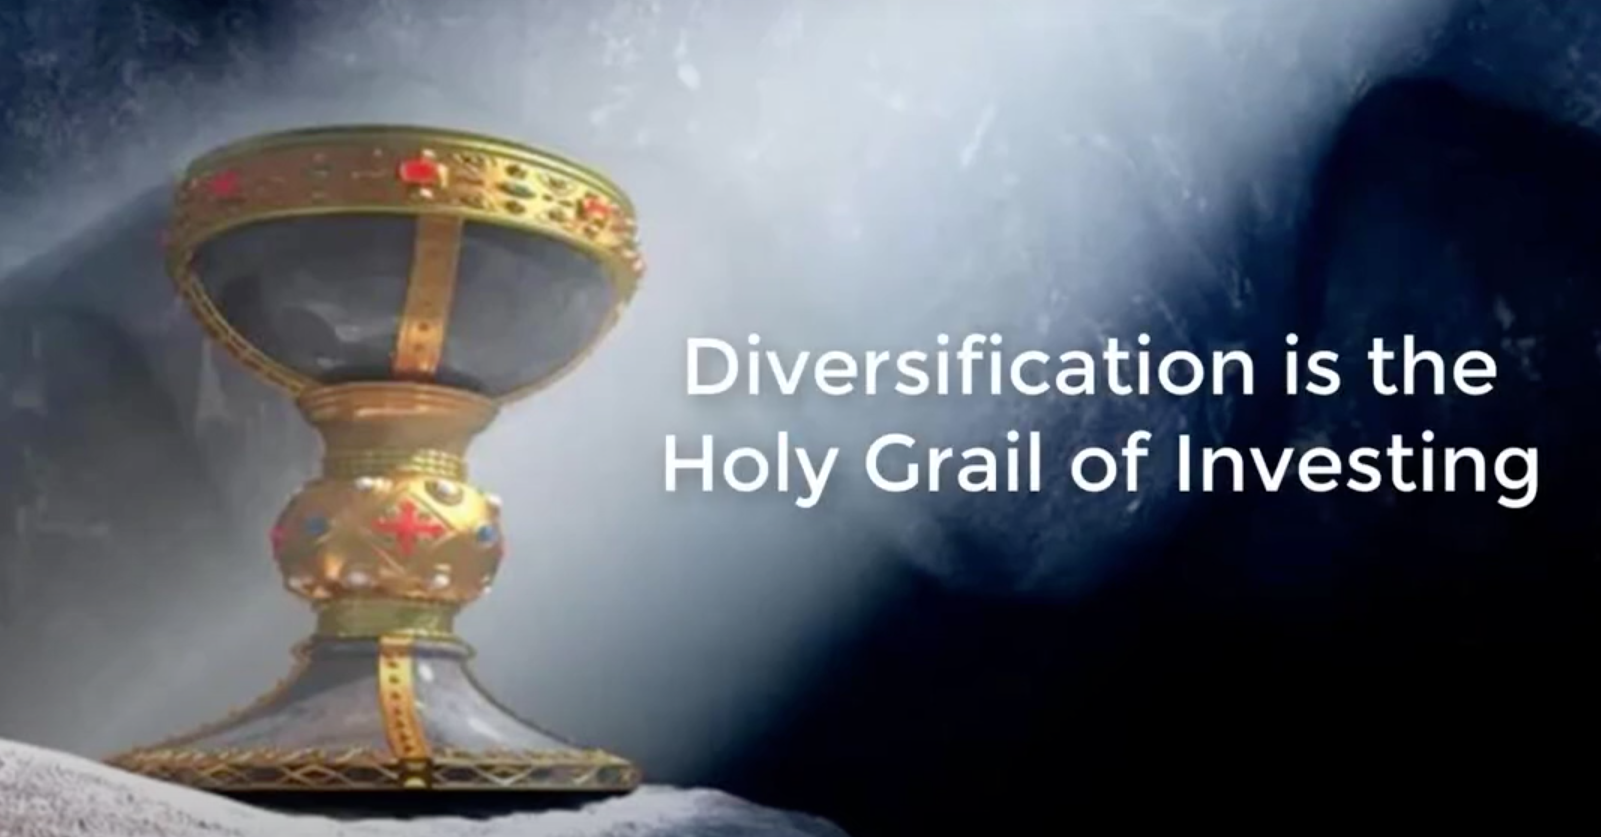 What is the Holy Grail of Investing?